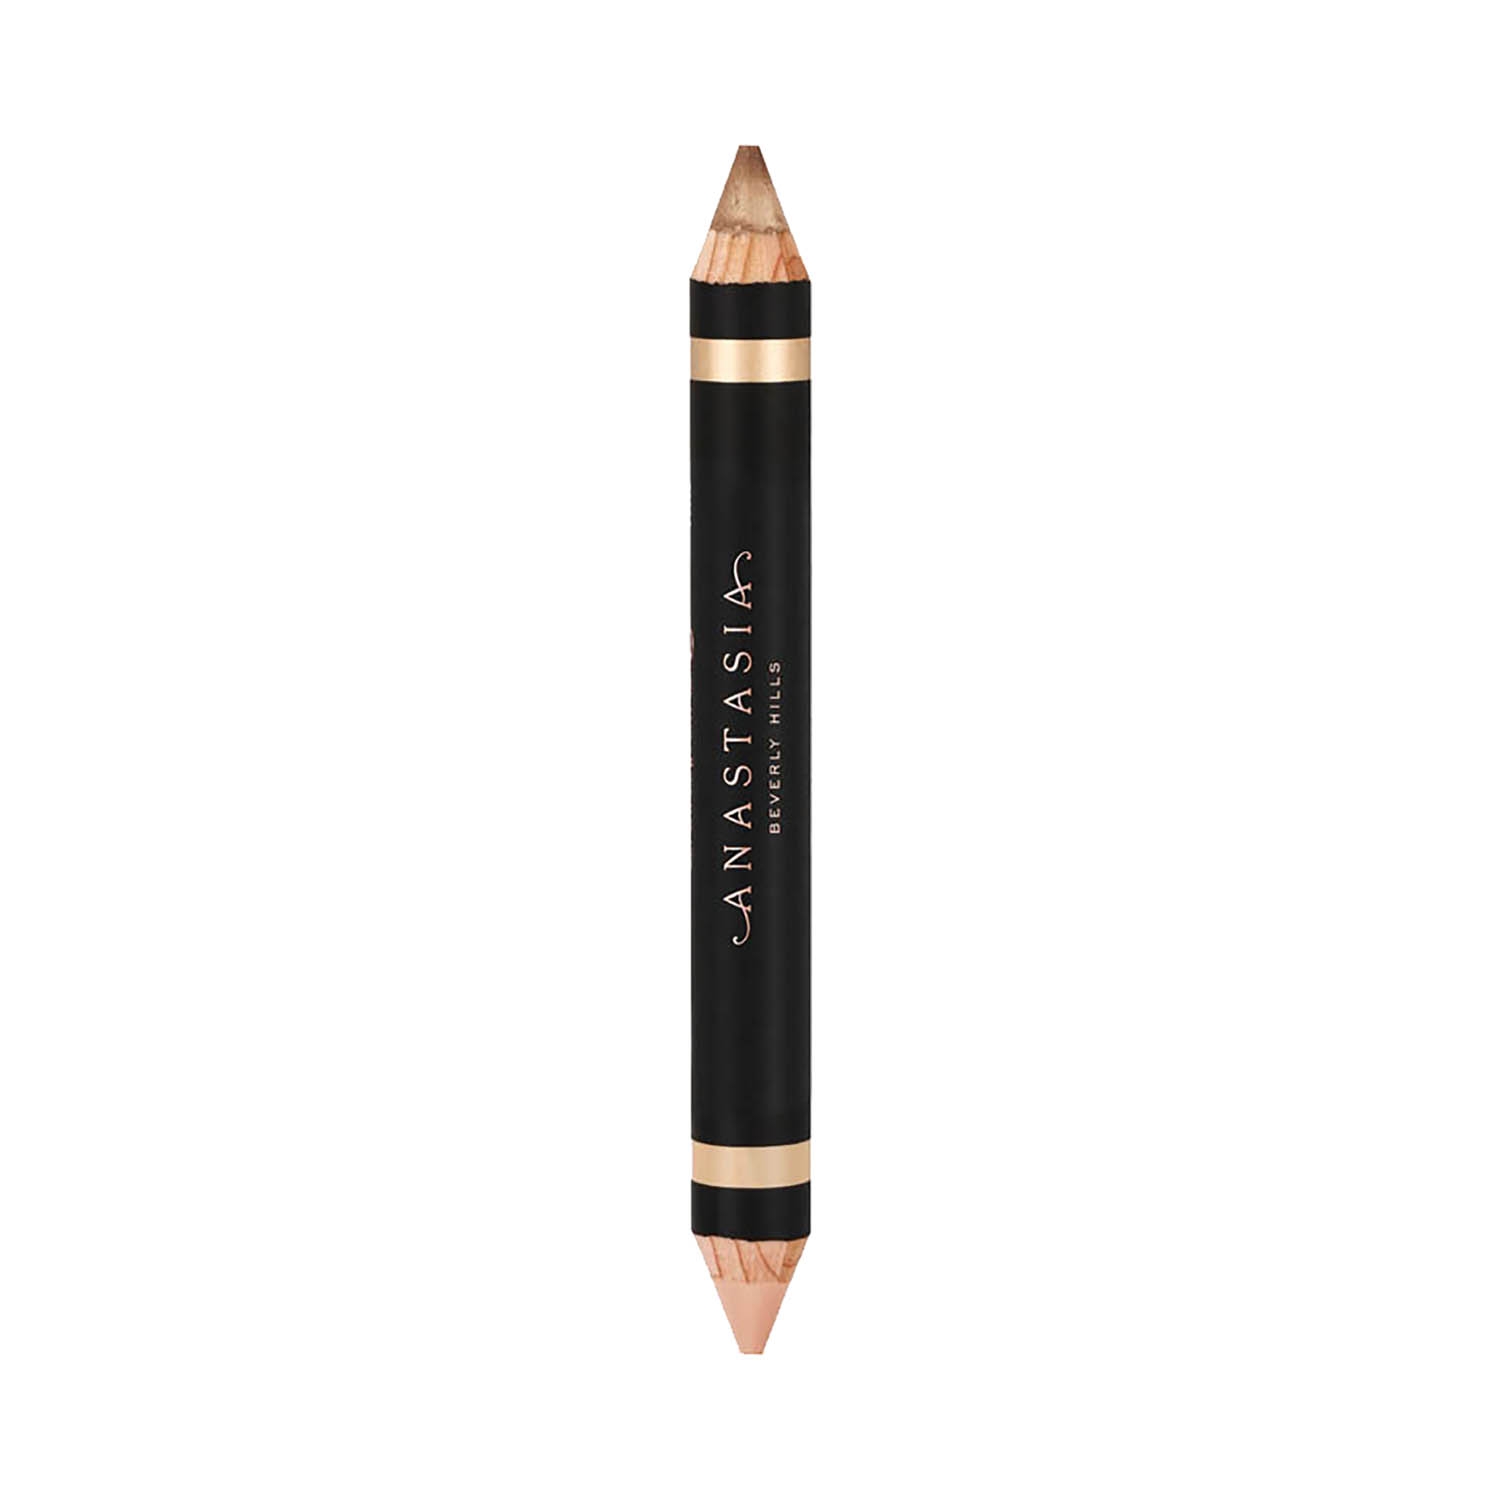 Anastasia Beverly Hills | Anastasia Beverly Hills Highlighting Duo Pencil - Matte Shell/Lace Shimmer (4.8g)